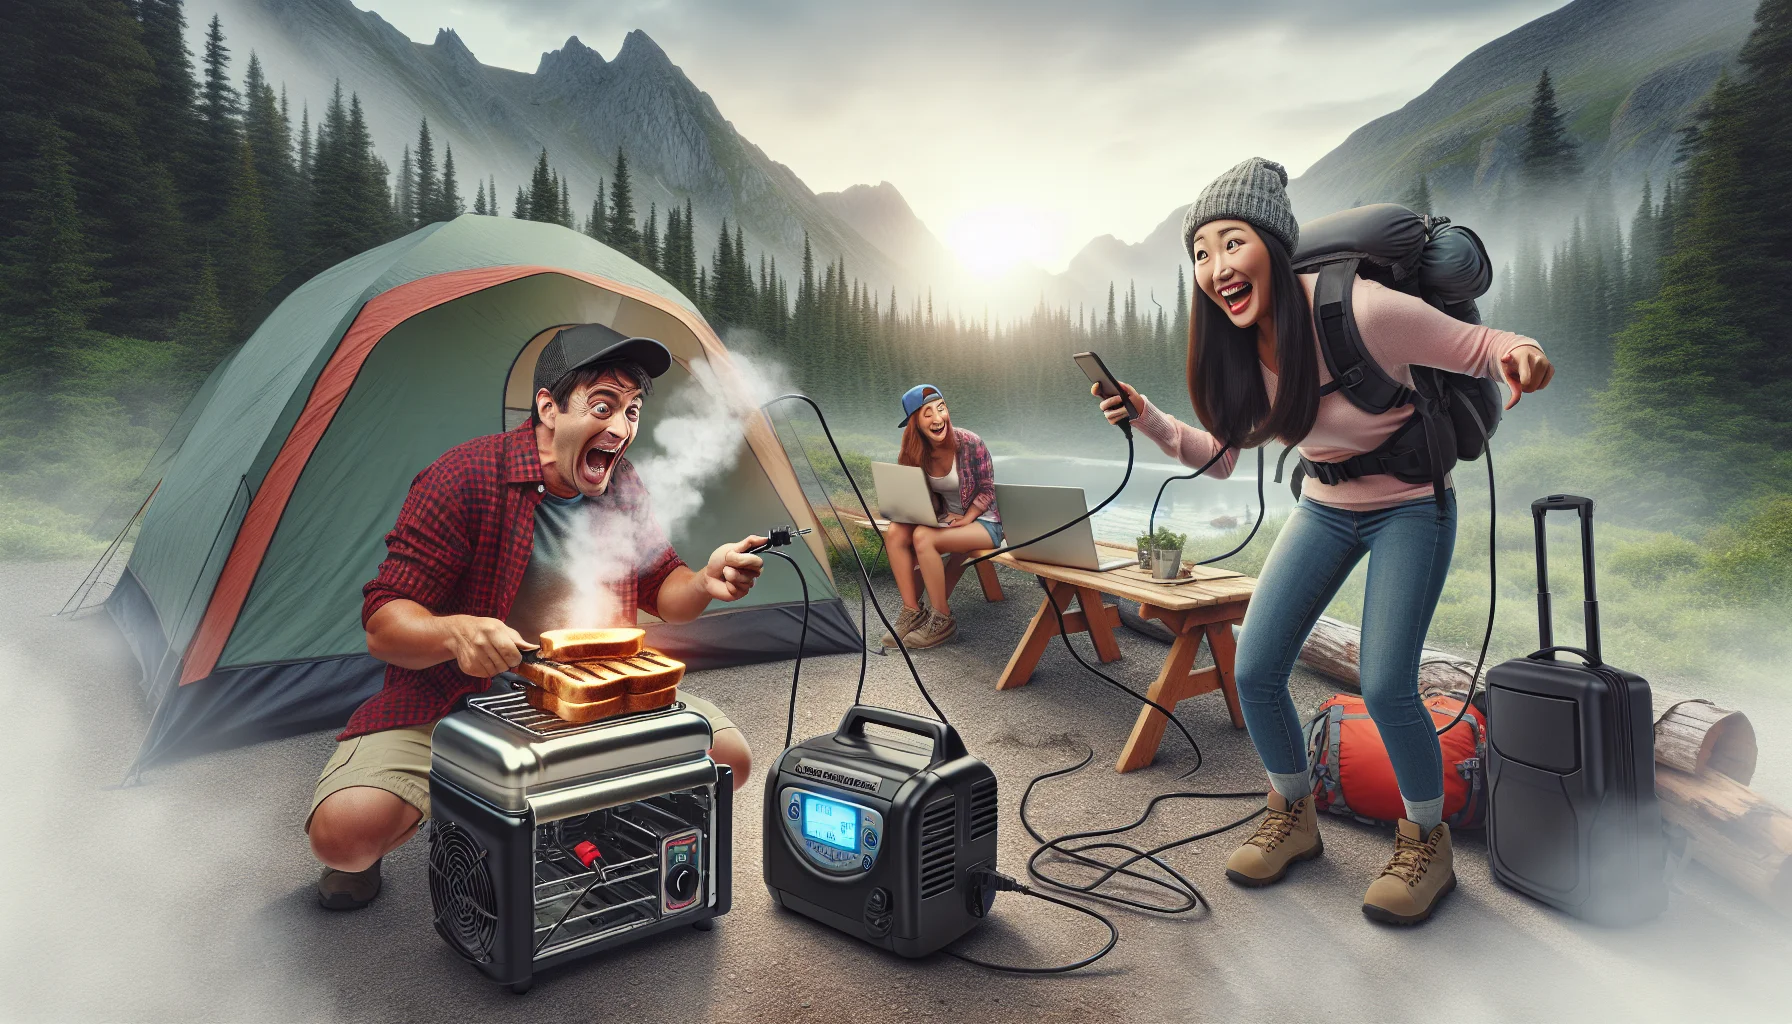 Create a humorous and realistically detailed image showcasing portable power generators in a camping scenario. Imagine a Caucasian male hiker accidentally plugging a toaster into a generator instead of his phone, causing smoke. An Asian female camper nearby is laughing and pointing, while simultaneously charging her laptop from another generator. Through this scenario, subtly evoke the usefulness and convenience of portable generators in providing electricity outdoors.